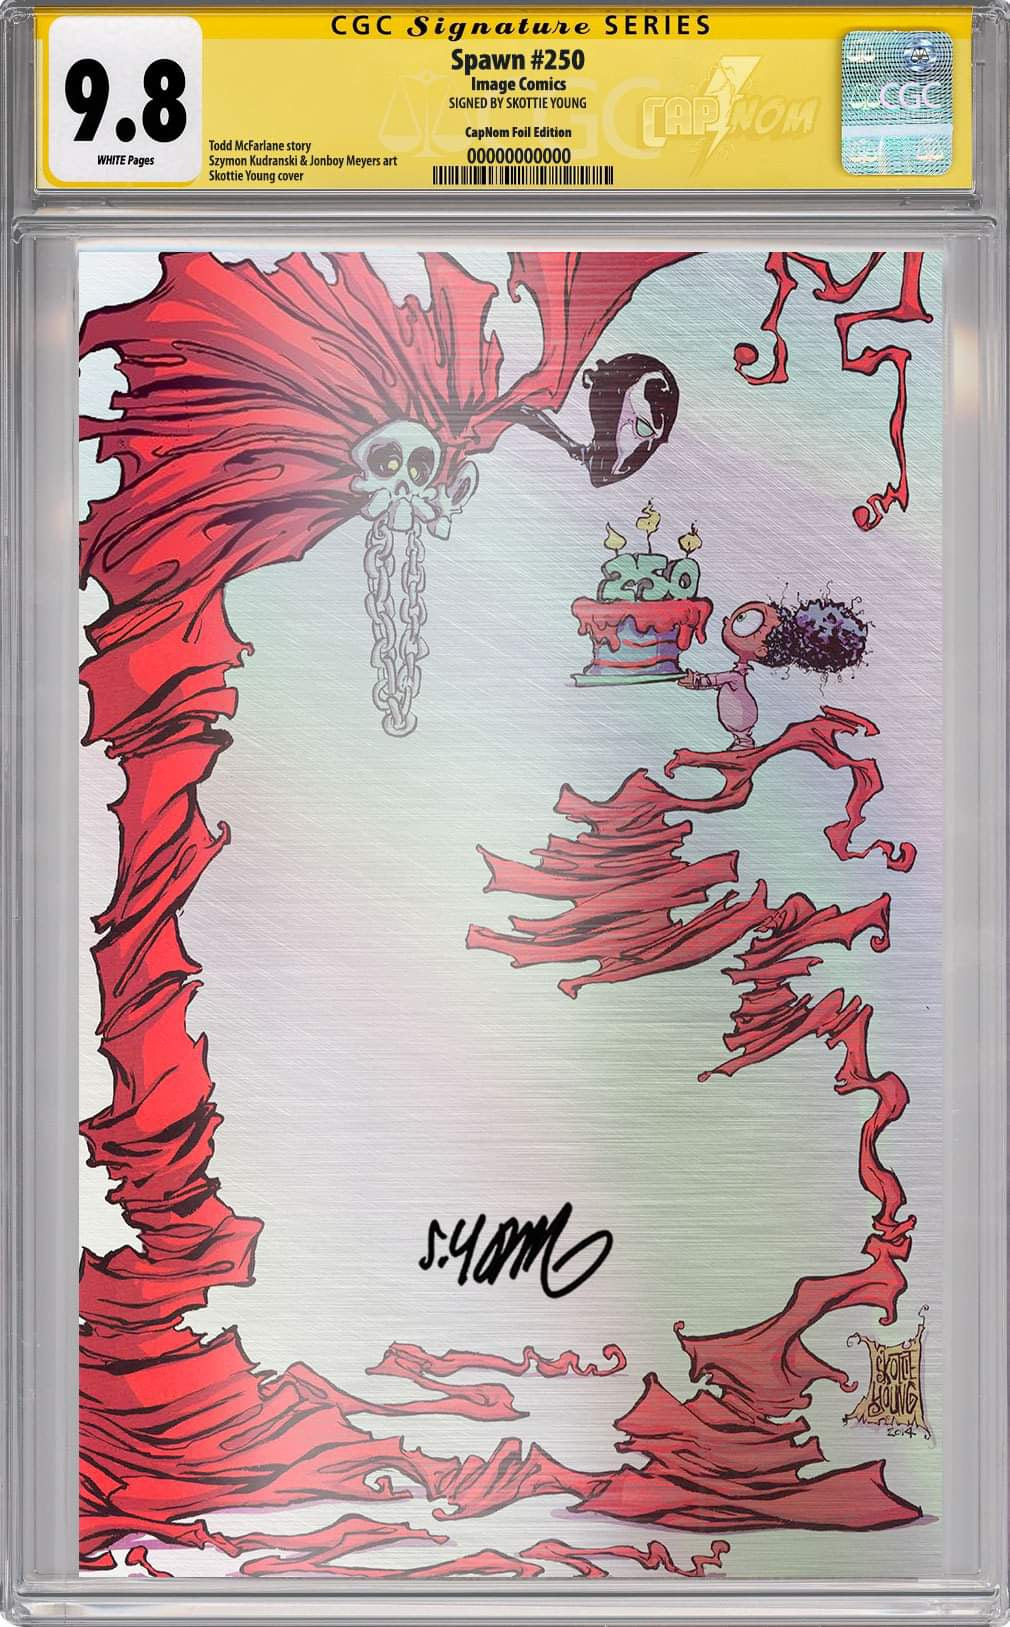 SPAWN 250 SILVER VIRGIN FOIL COVER BY SKOTTIE YOUNG MEXICAN FOIL EDITION CGC SIG SERIES SIGNED BY SKOTTIE YOUNG